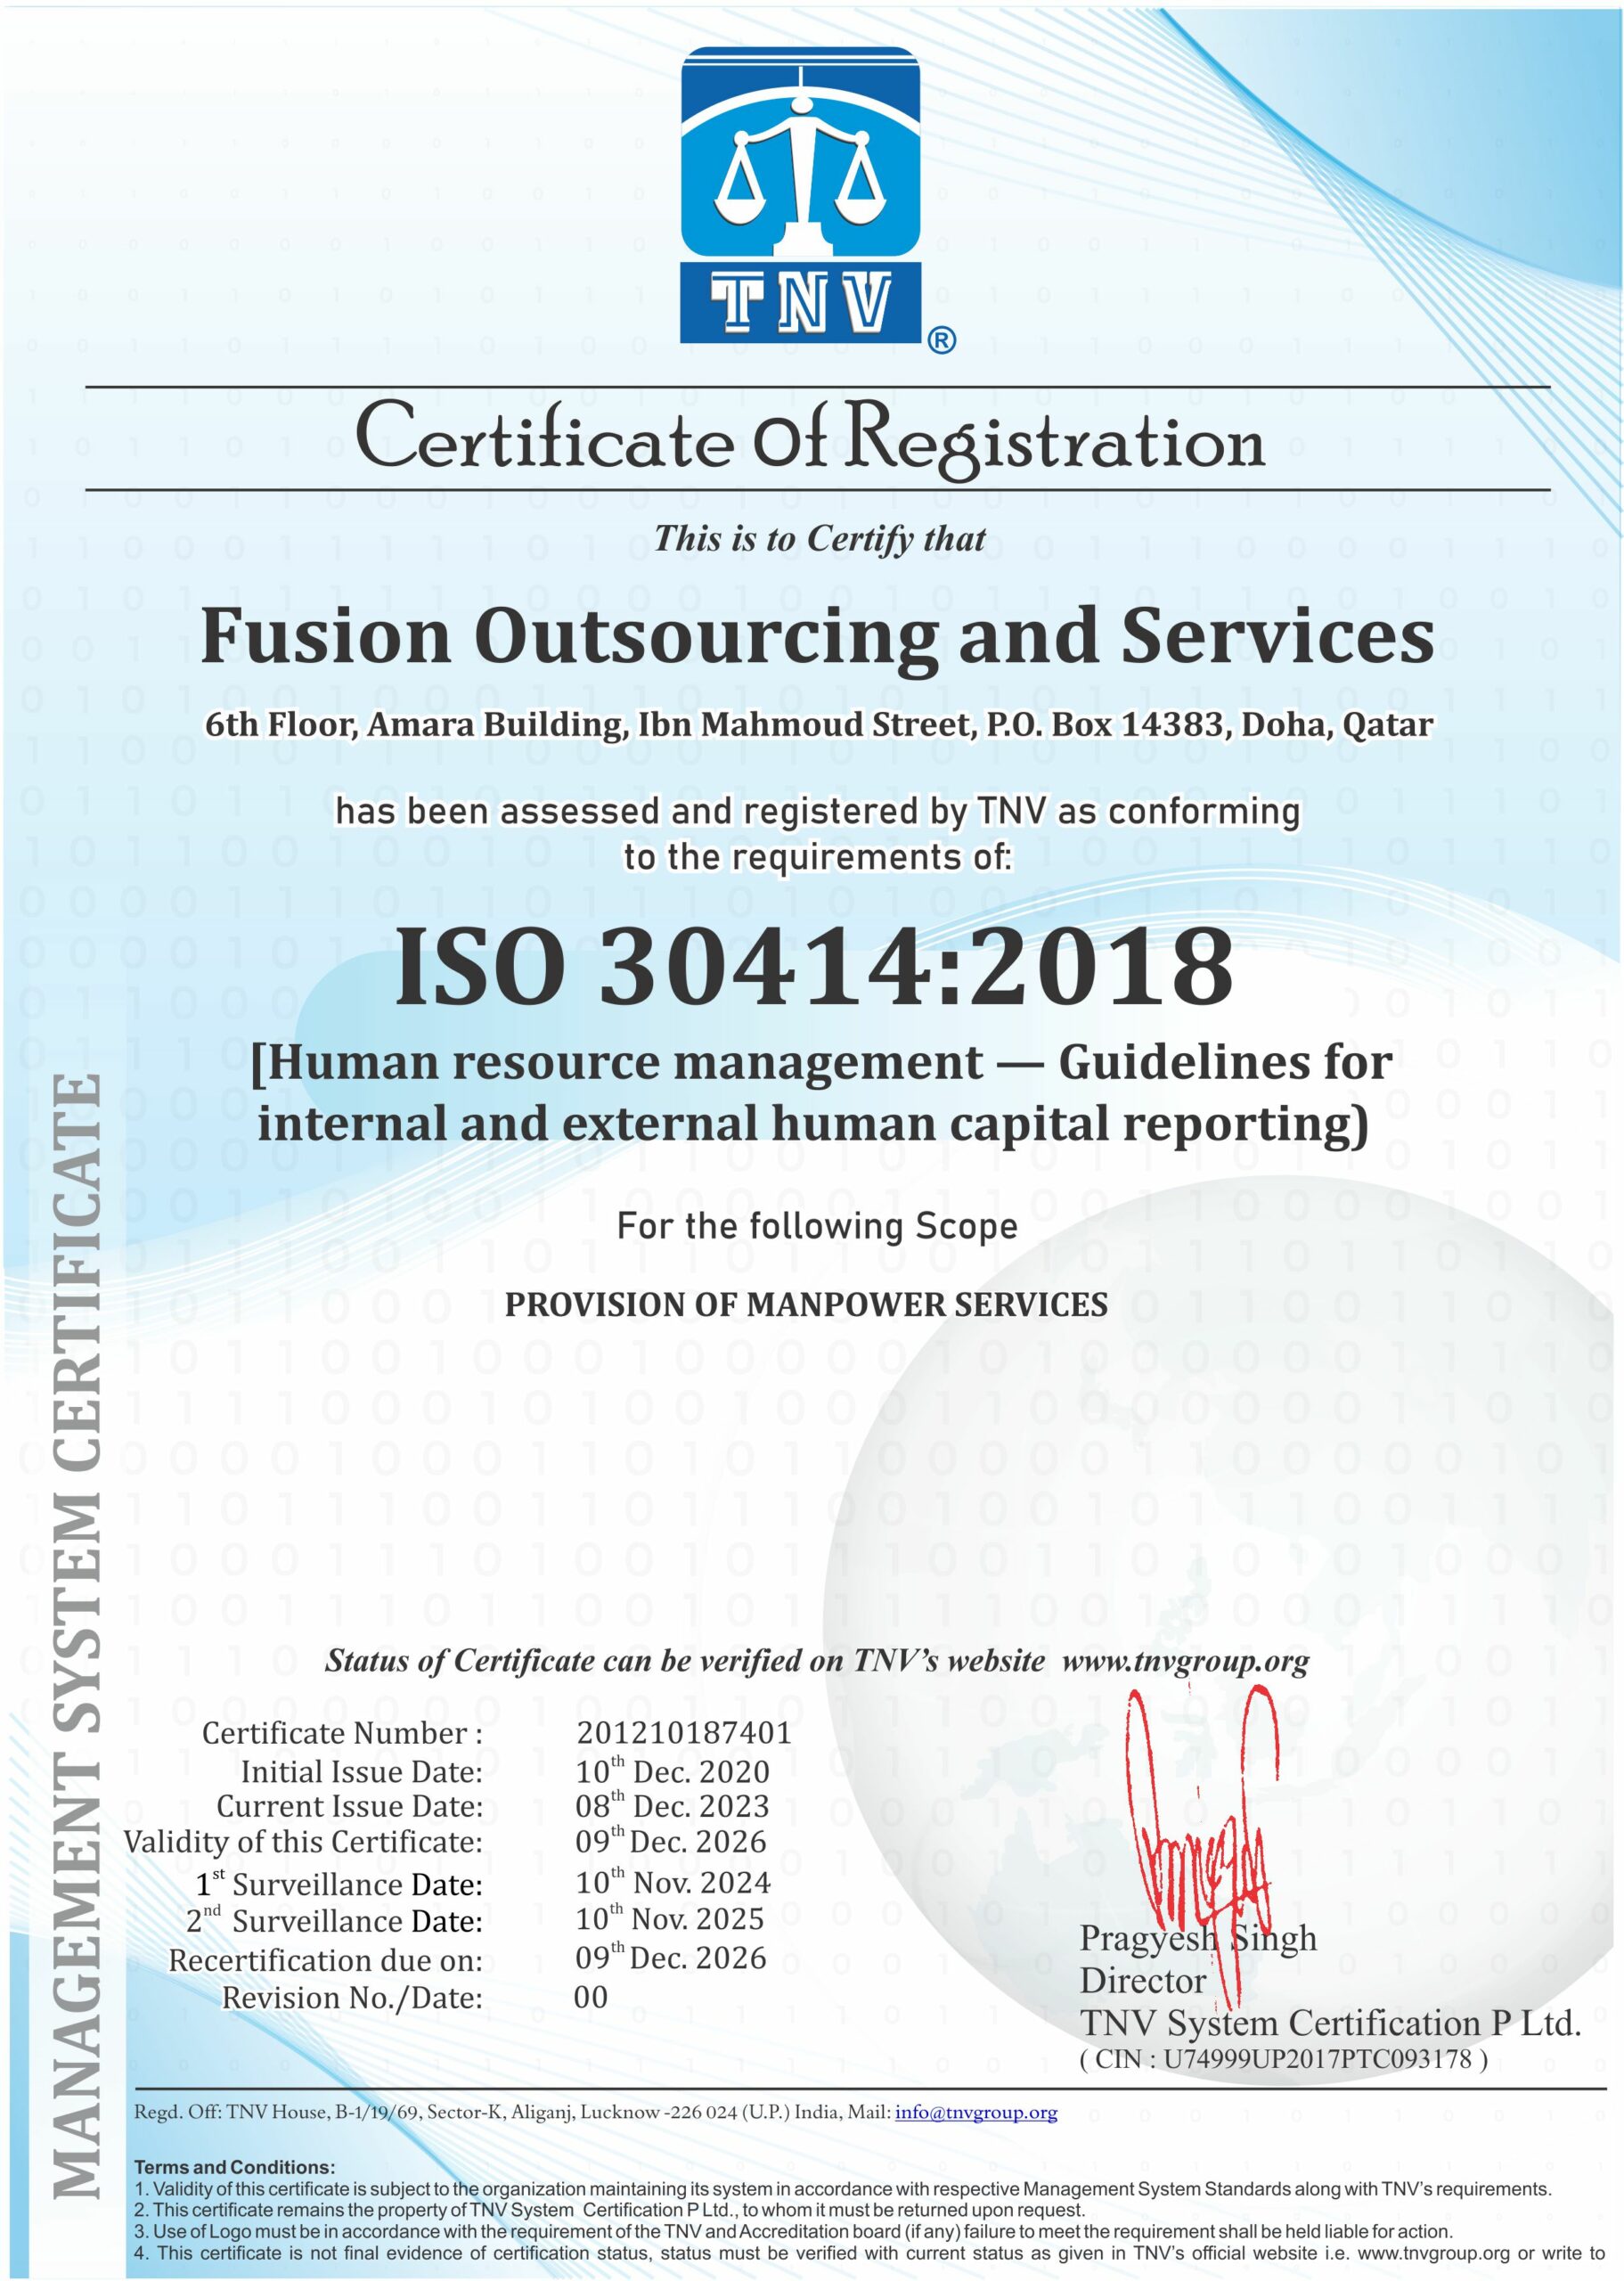 ISO 30414:2018 <br> Human Resource Management — Guidelines For Internal & External Human Capital Reporting